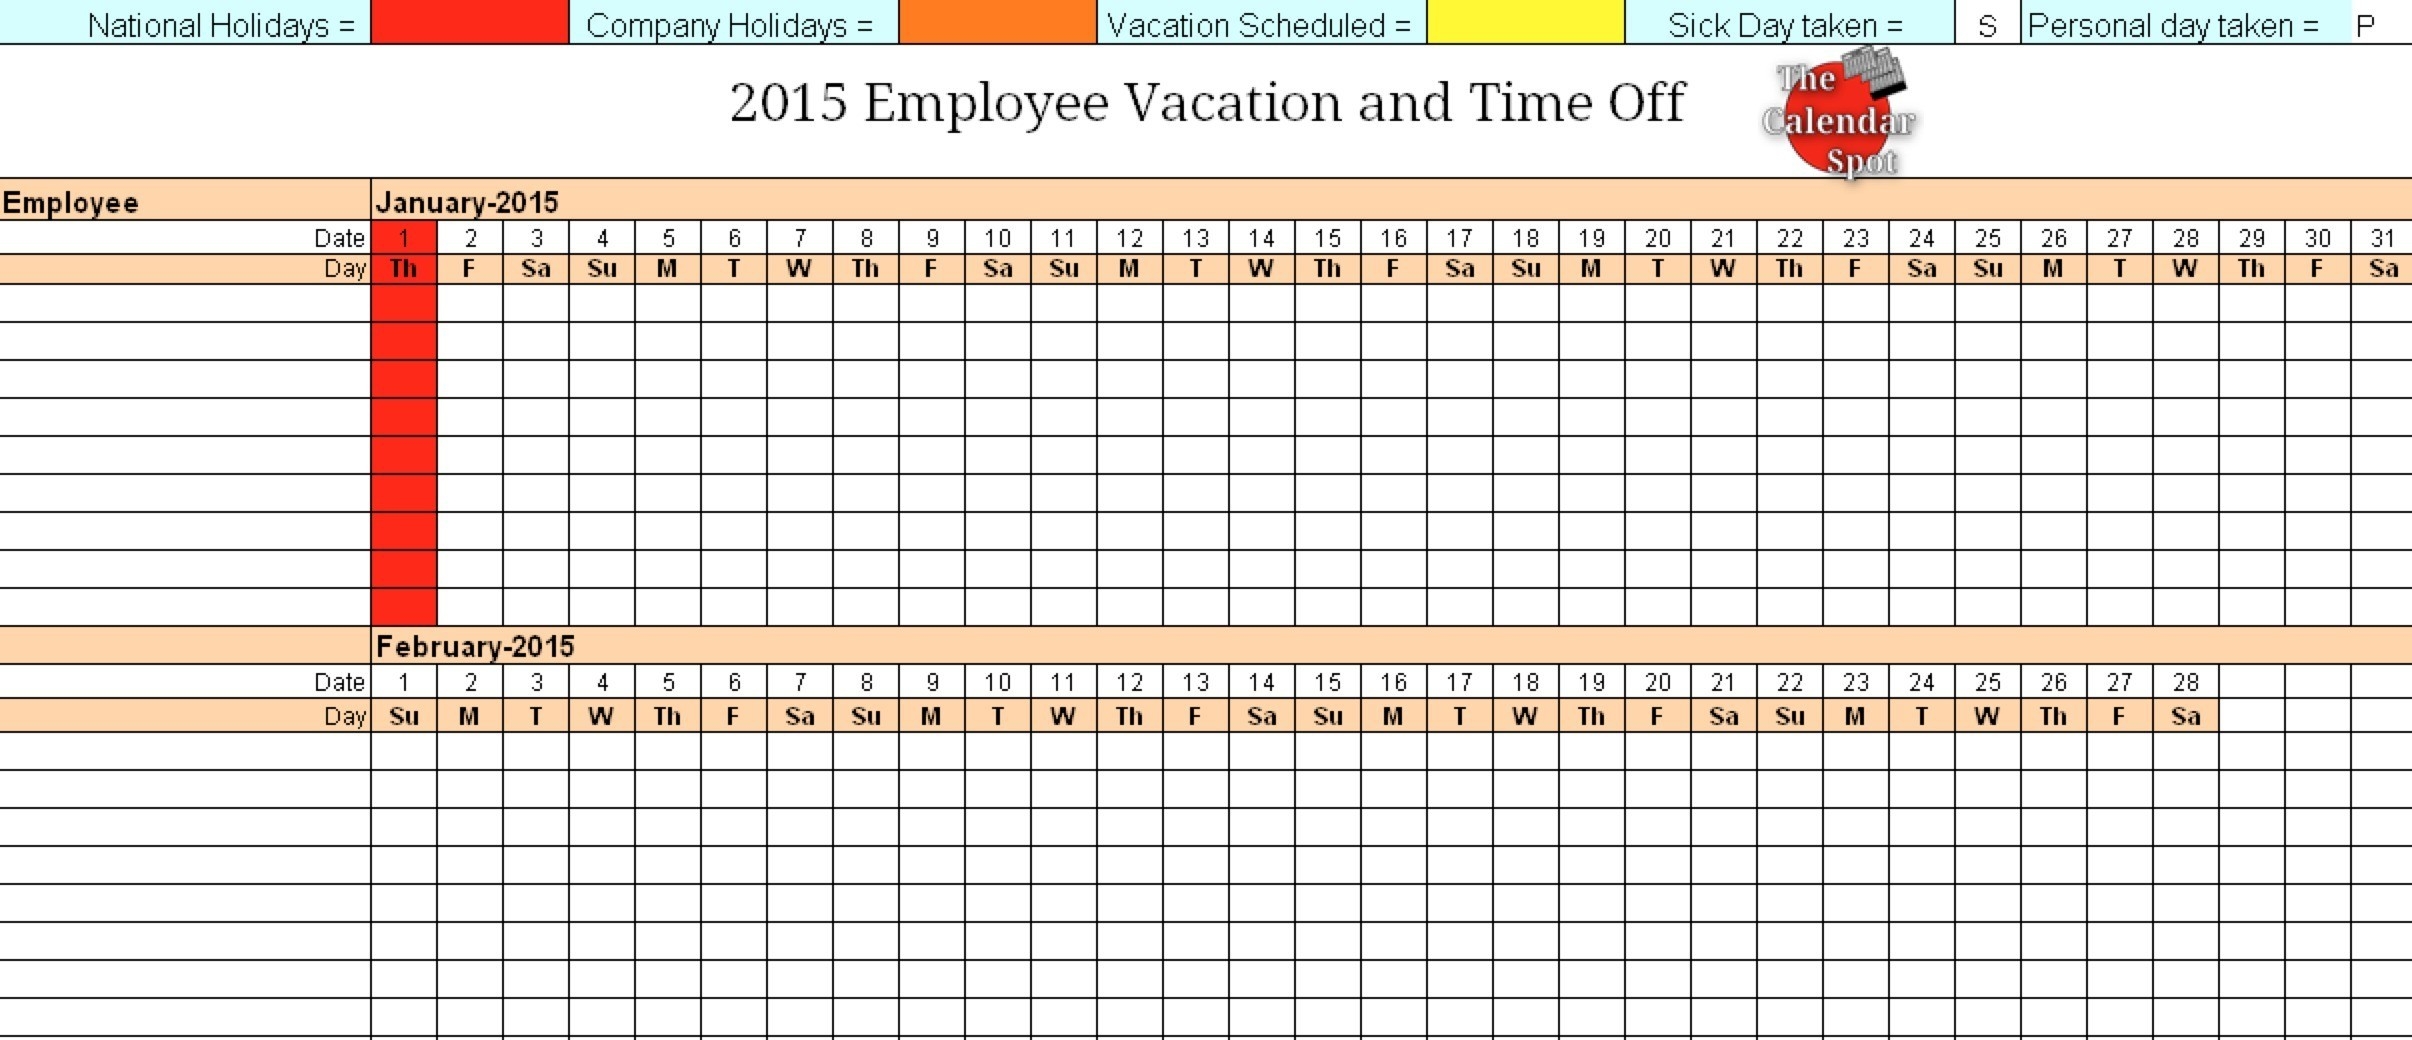 Vacation Schedule Template 4 At Time Off Calendar Template-Vacation Calendar Template Free